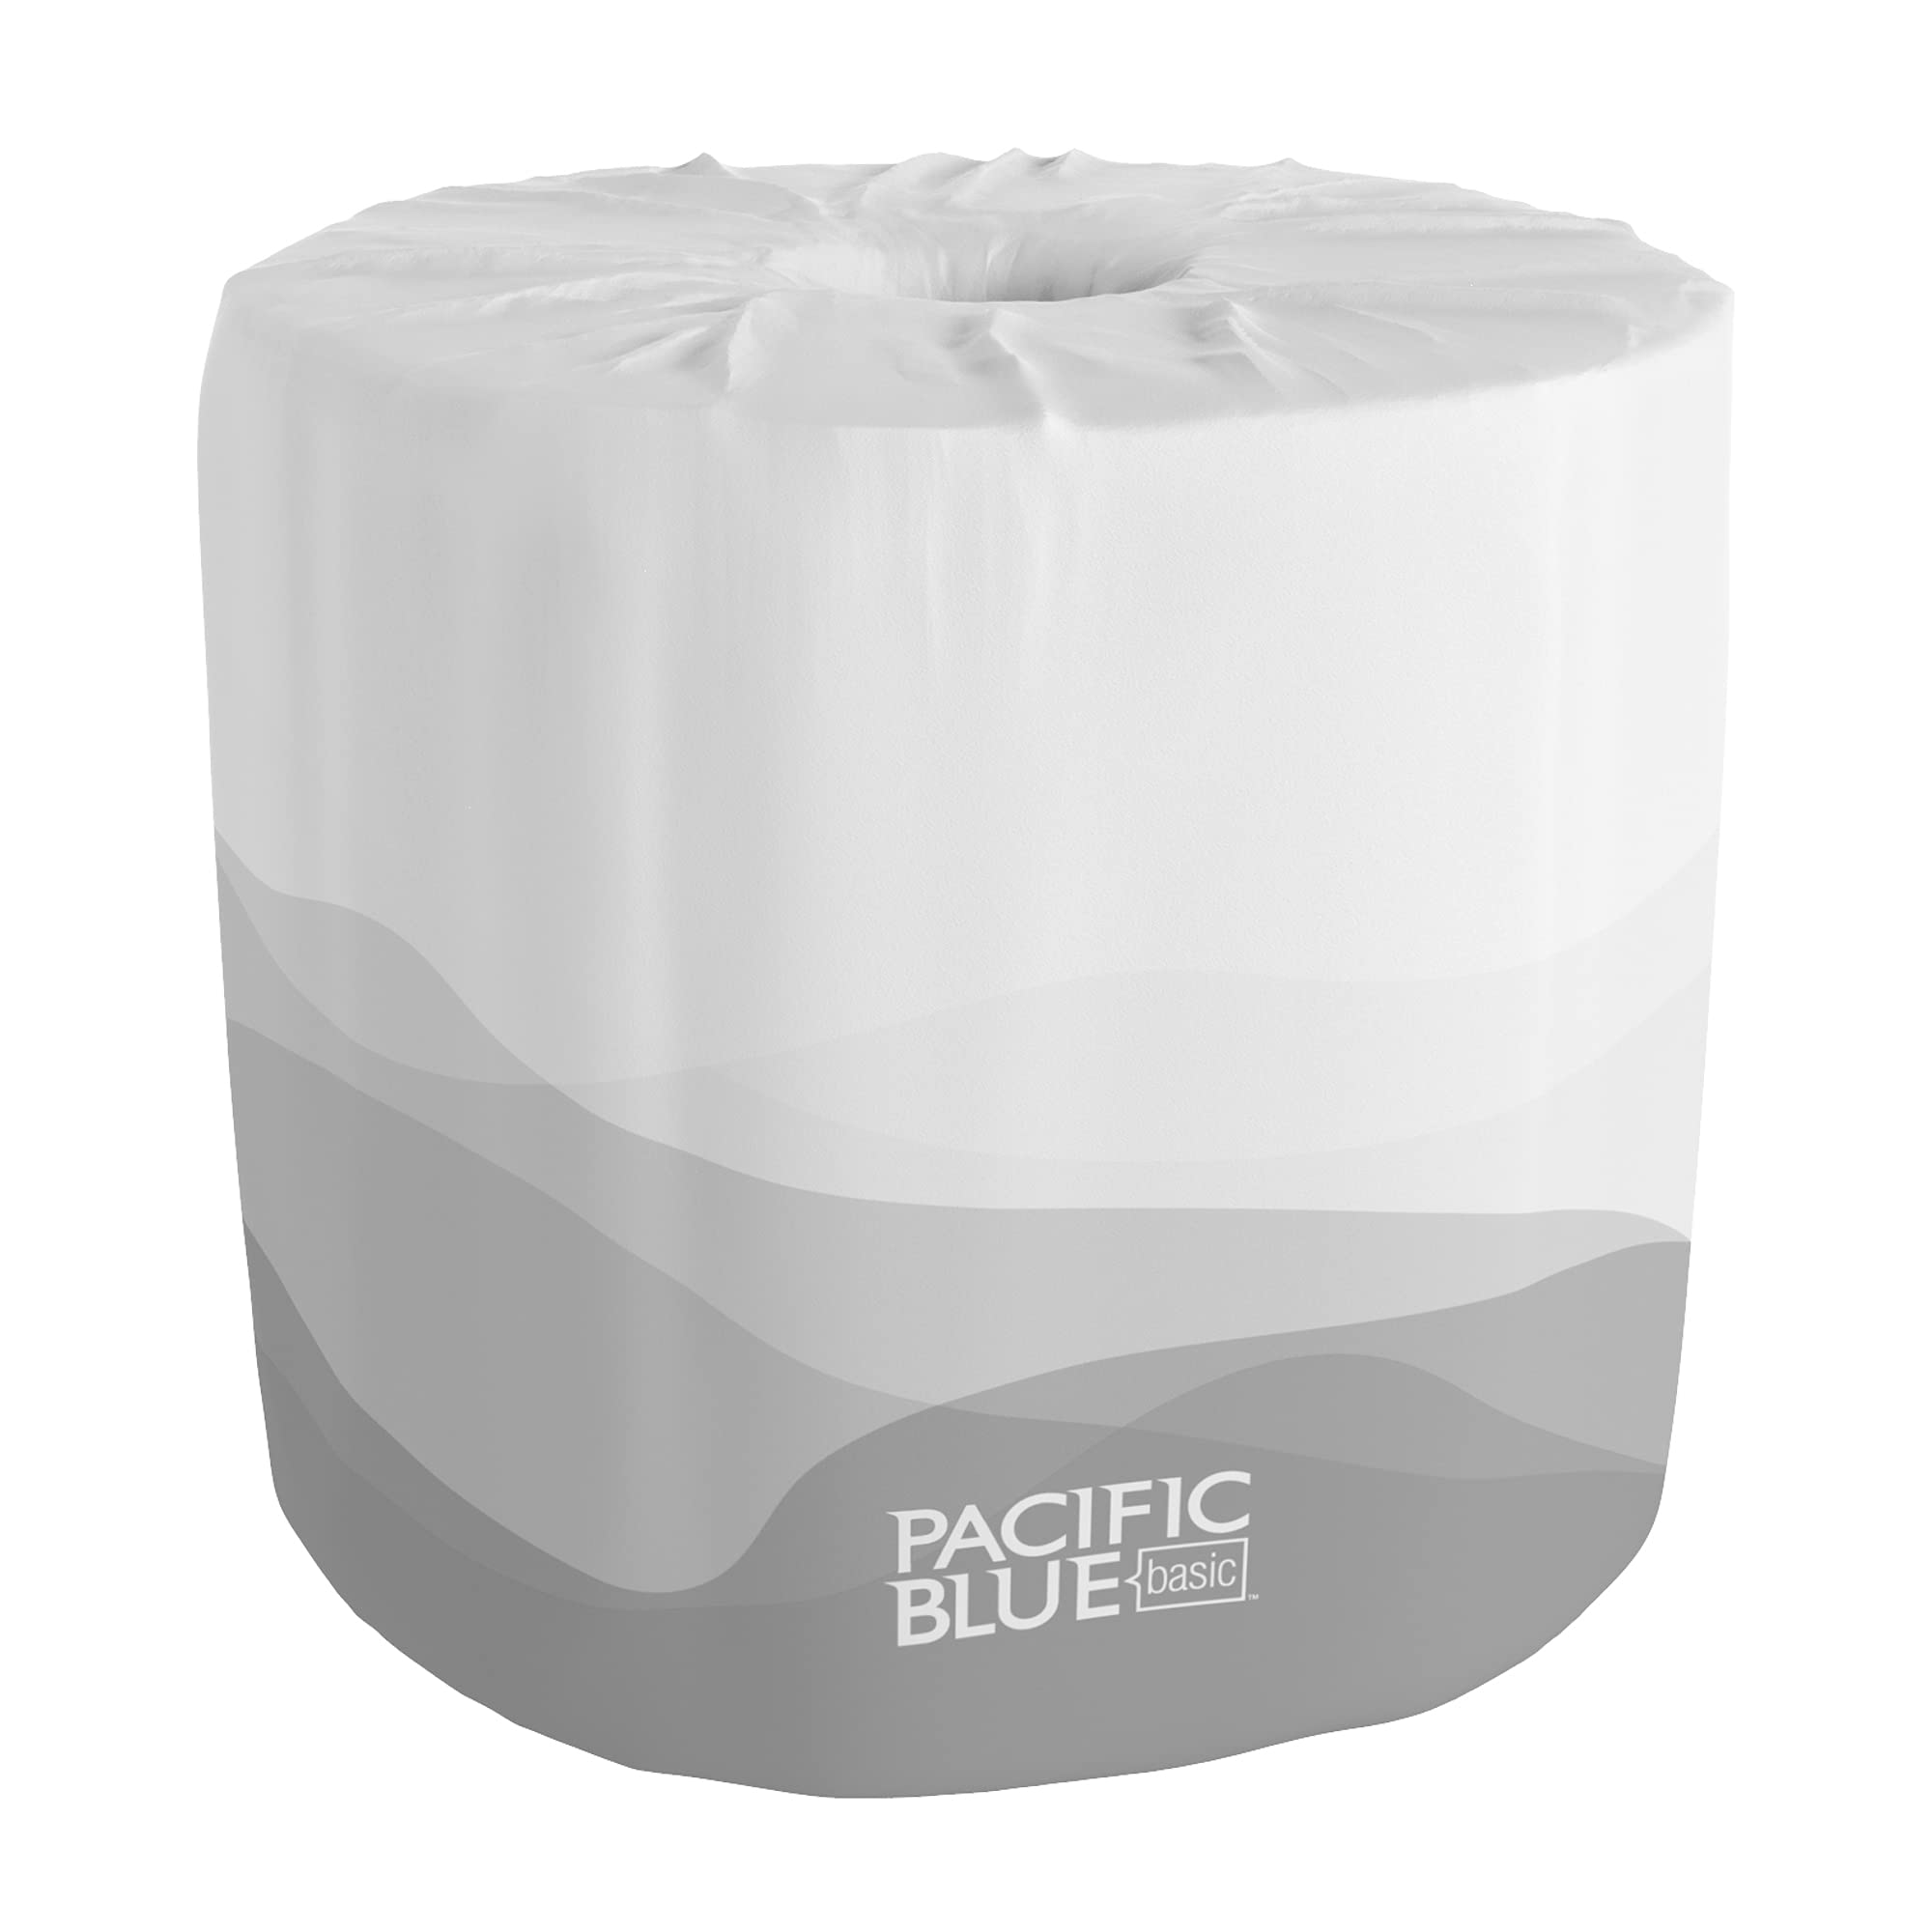 Pacific Blue Basic 1-Ply Embossed Toilet Paper (previously branded Envision): 19881/01: 550 Sheets Per Roll: 80 Rolls Per Case